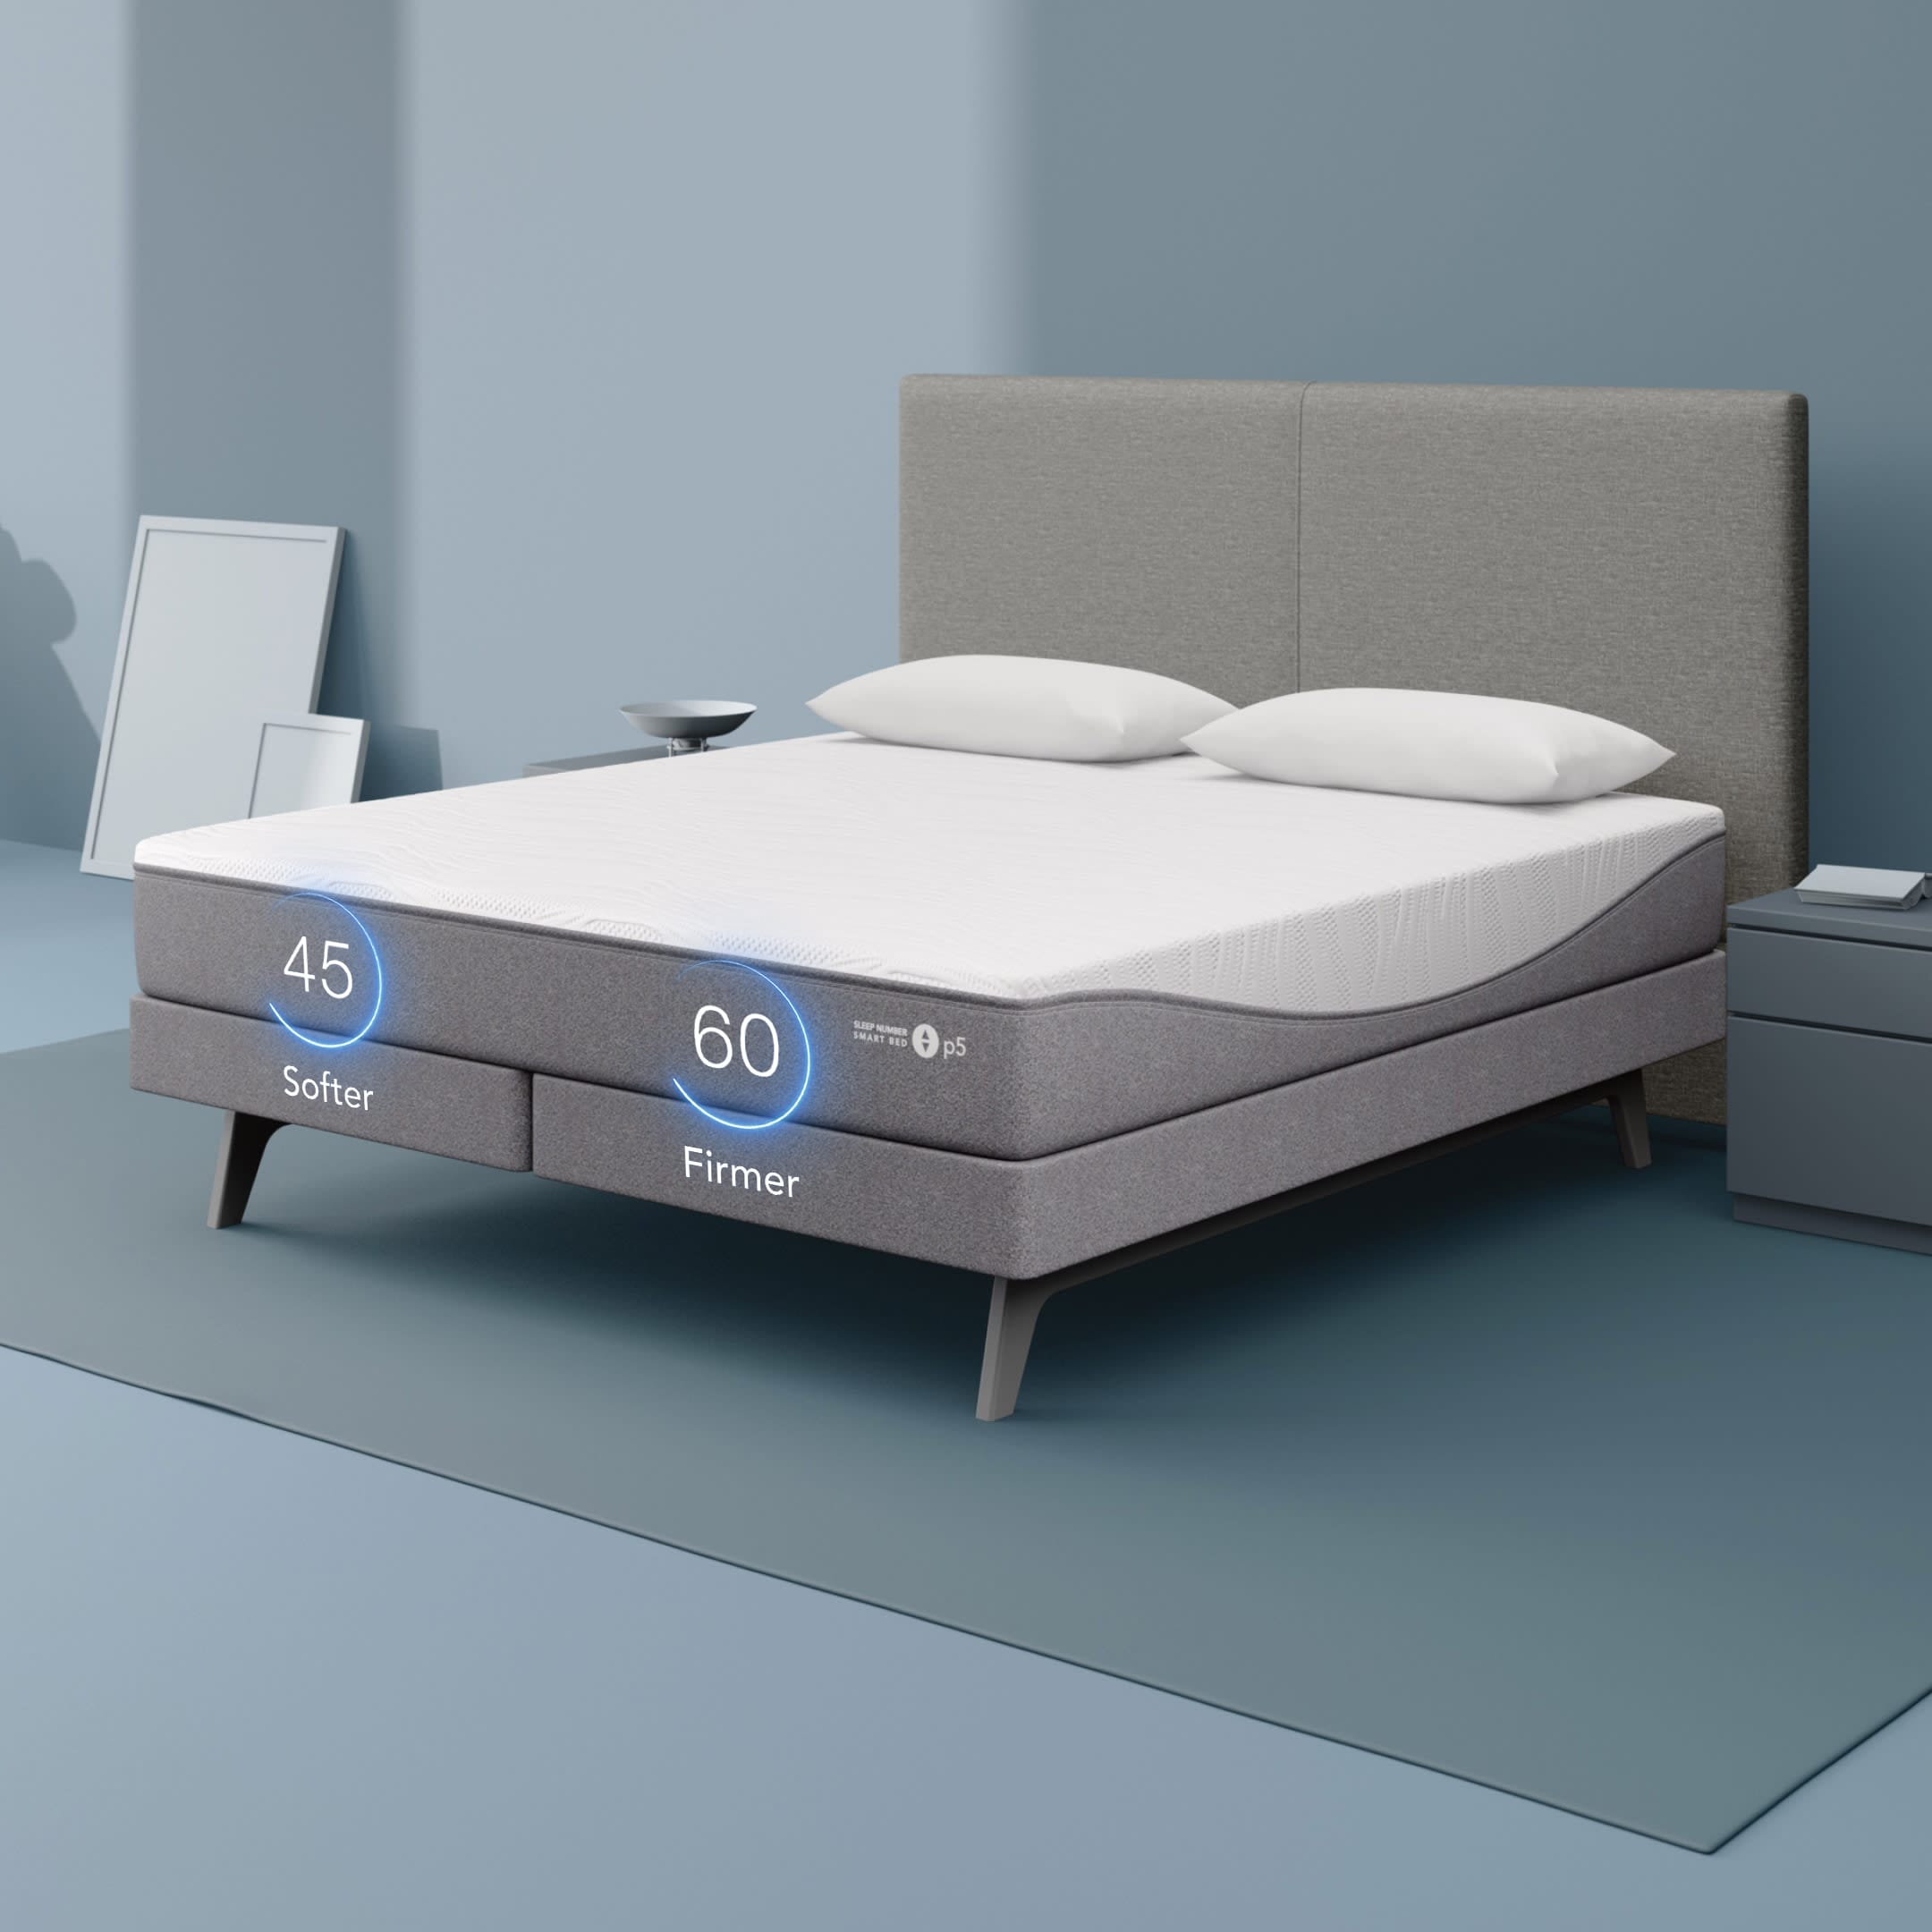 https://cdn.sleepnumber.com/image/upload/f_auto,q_auto:eco/v1695049063/workarea/catalog/product_images/p5/p5_1080_Gallery_45_Numbers